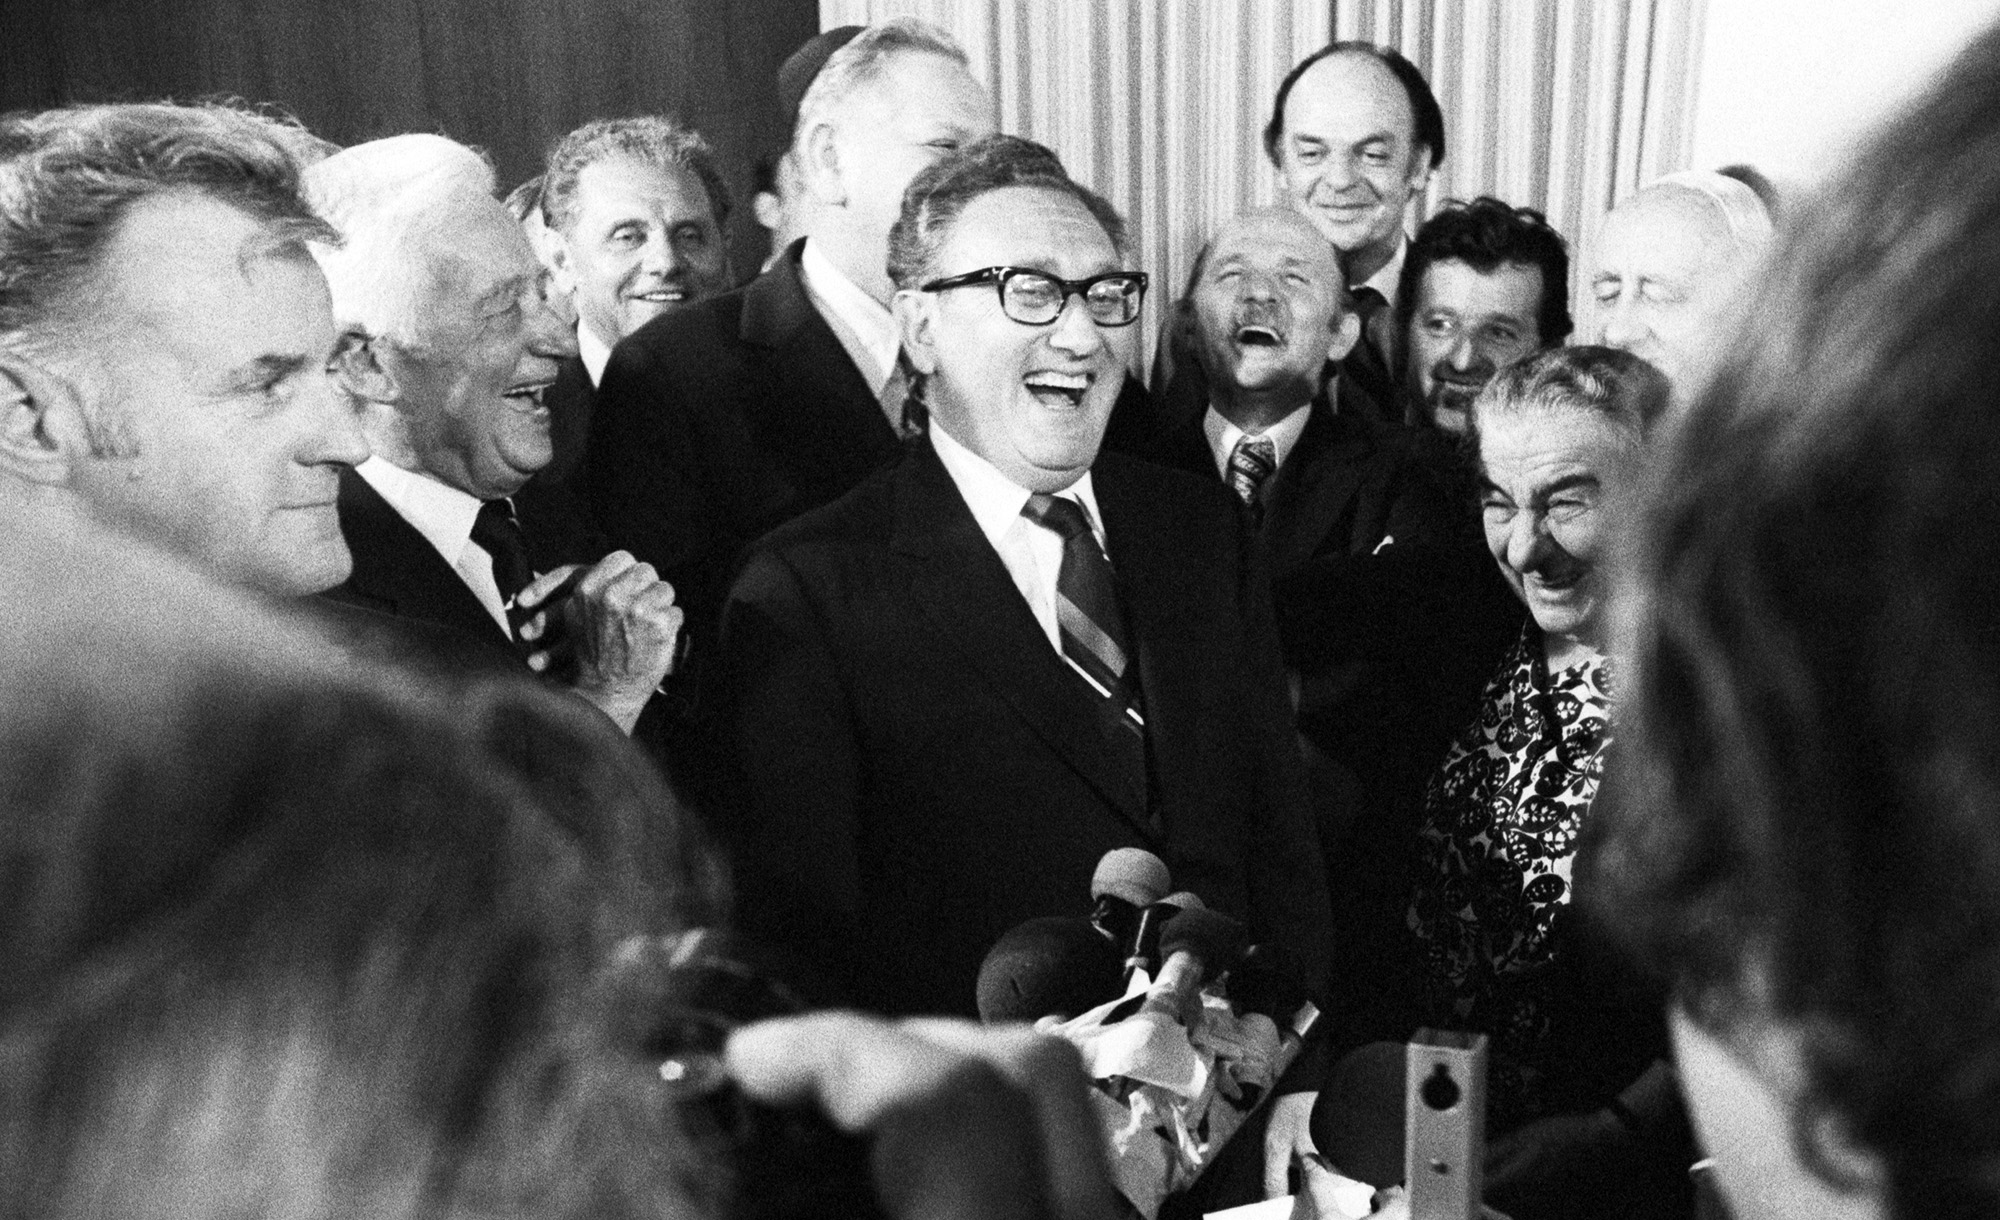 U.S. Secretary of State Henry Kissinger, Israeli Prime Minister Golda Meir, and other Israeli cabinet ministers roar with laughter after she had been kissed by Kissinger at a party May 29th, 1974. Bettmann/Getty.
